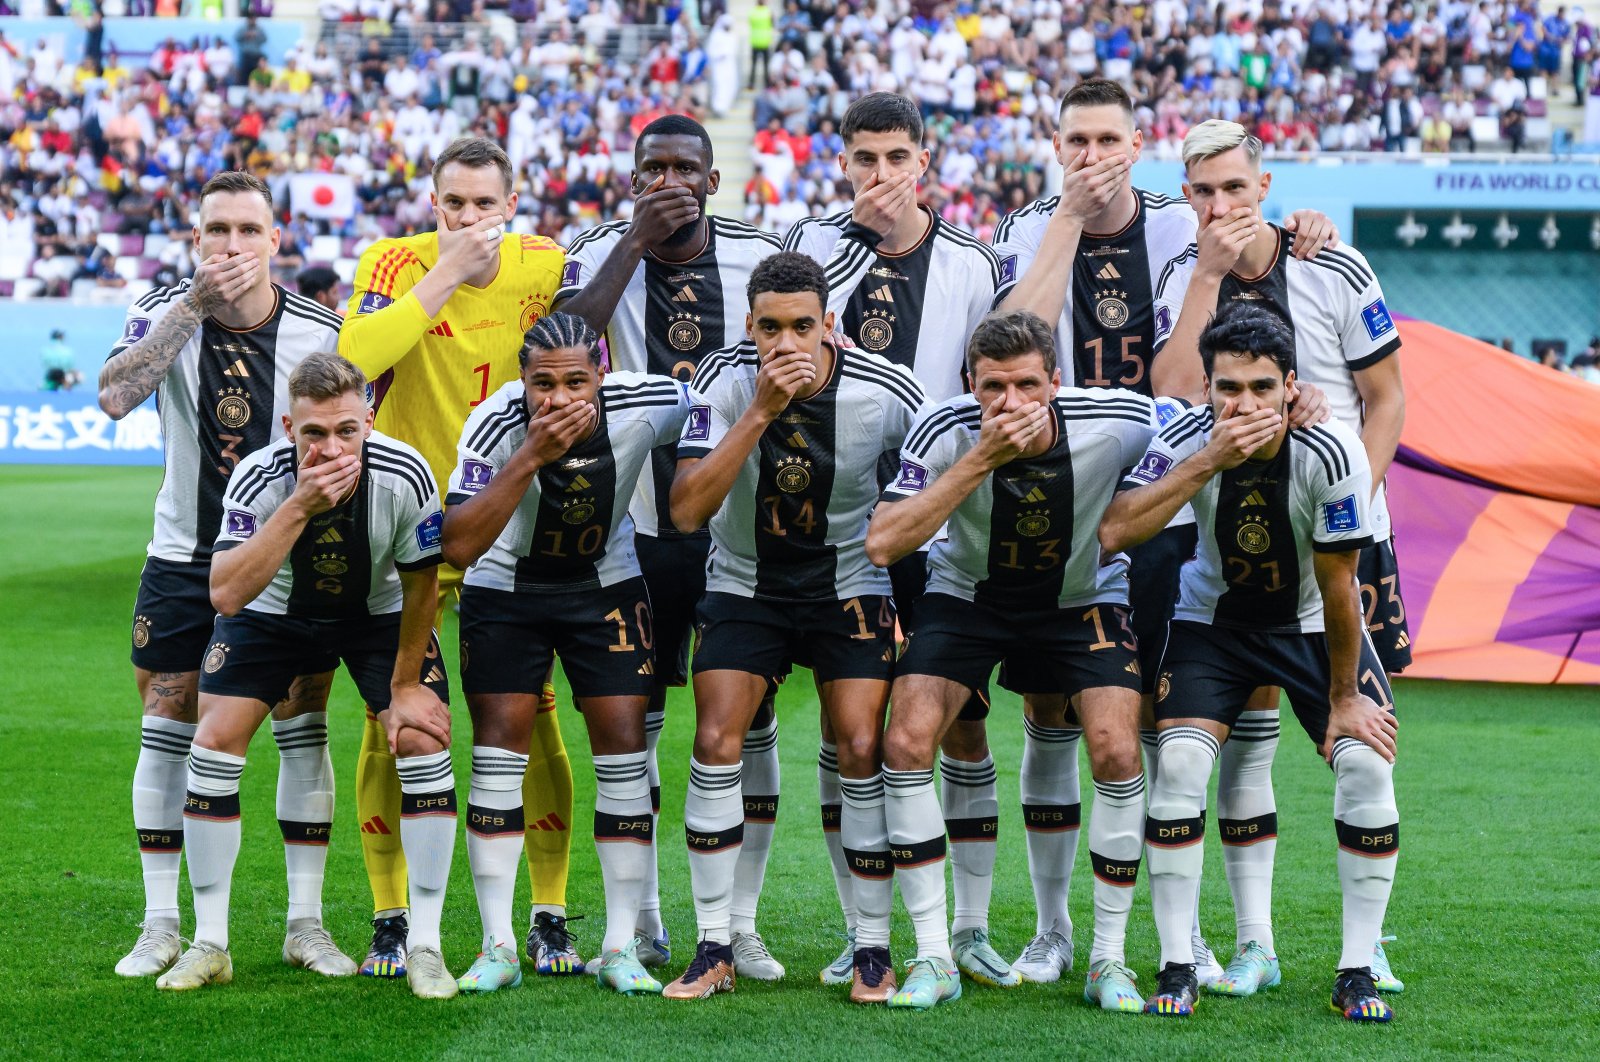 Germany players cover their mouths in protest as they pose for a team photo prior to the World Cup match against Japan at Khalifa International Stadium, Doha, Qatar, Nov. 23, 2022. (Getty Images photo)